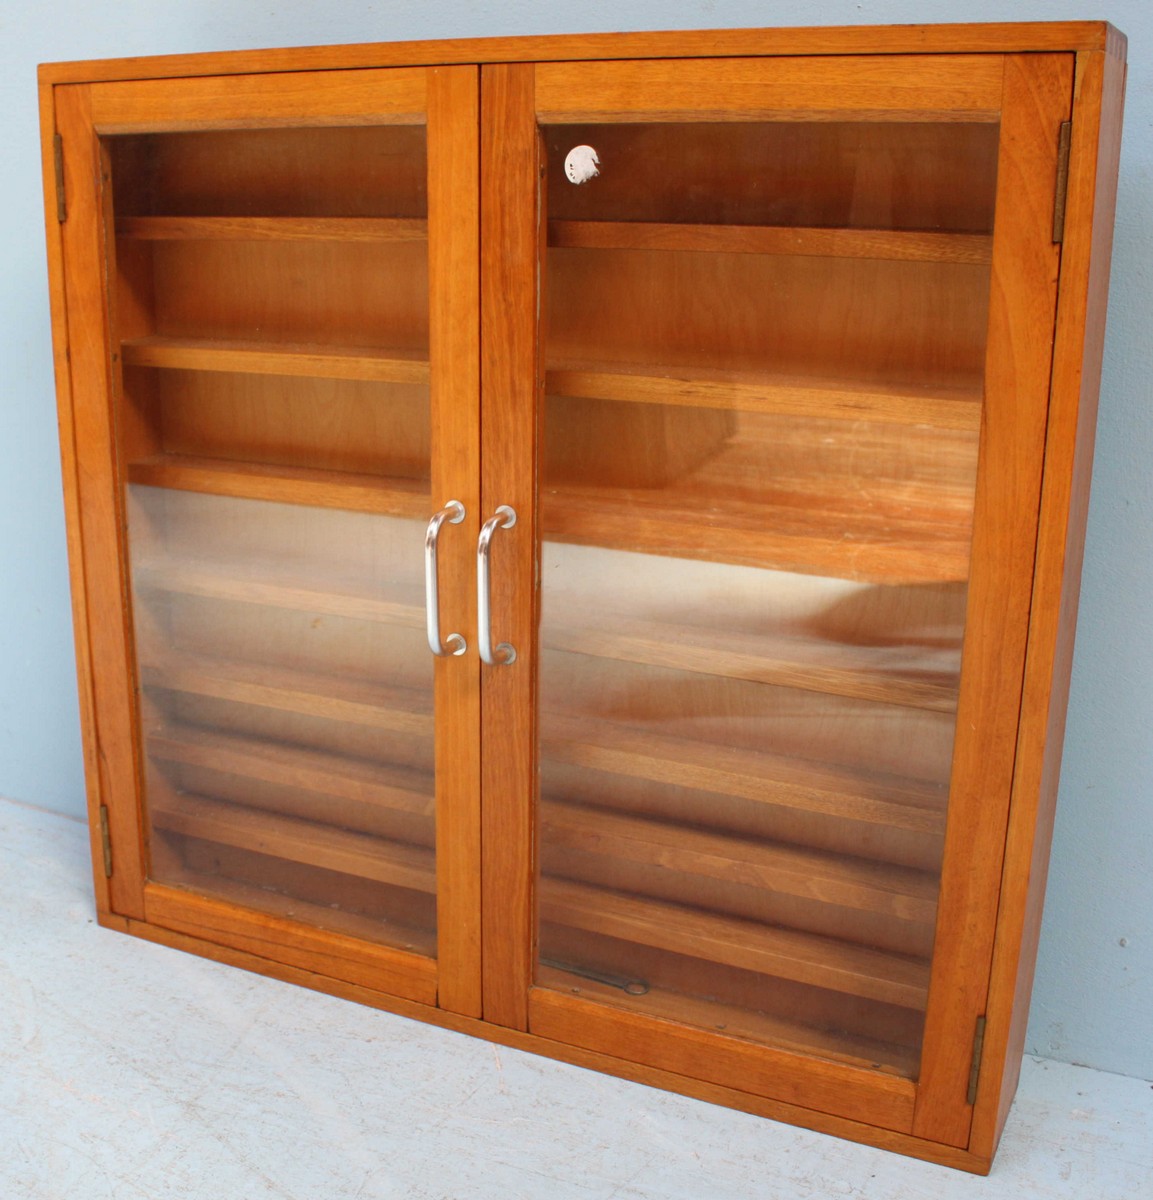 A stained wood two door hanging display cabinet, the two glazed doors enclosing seven shelves.